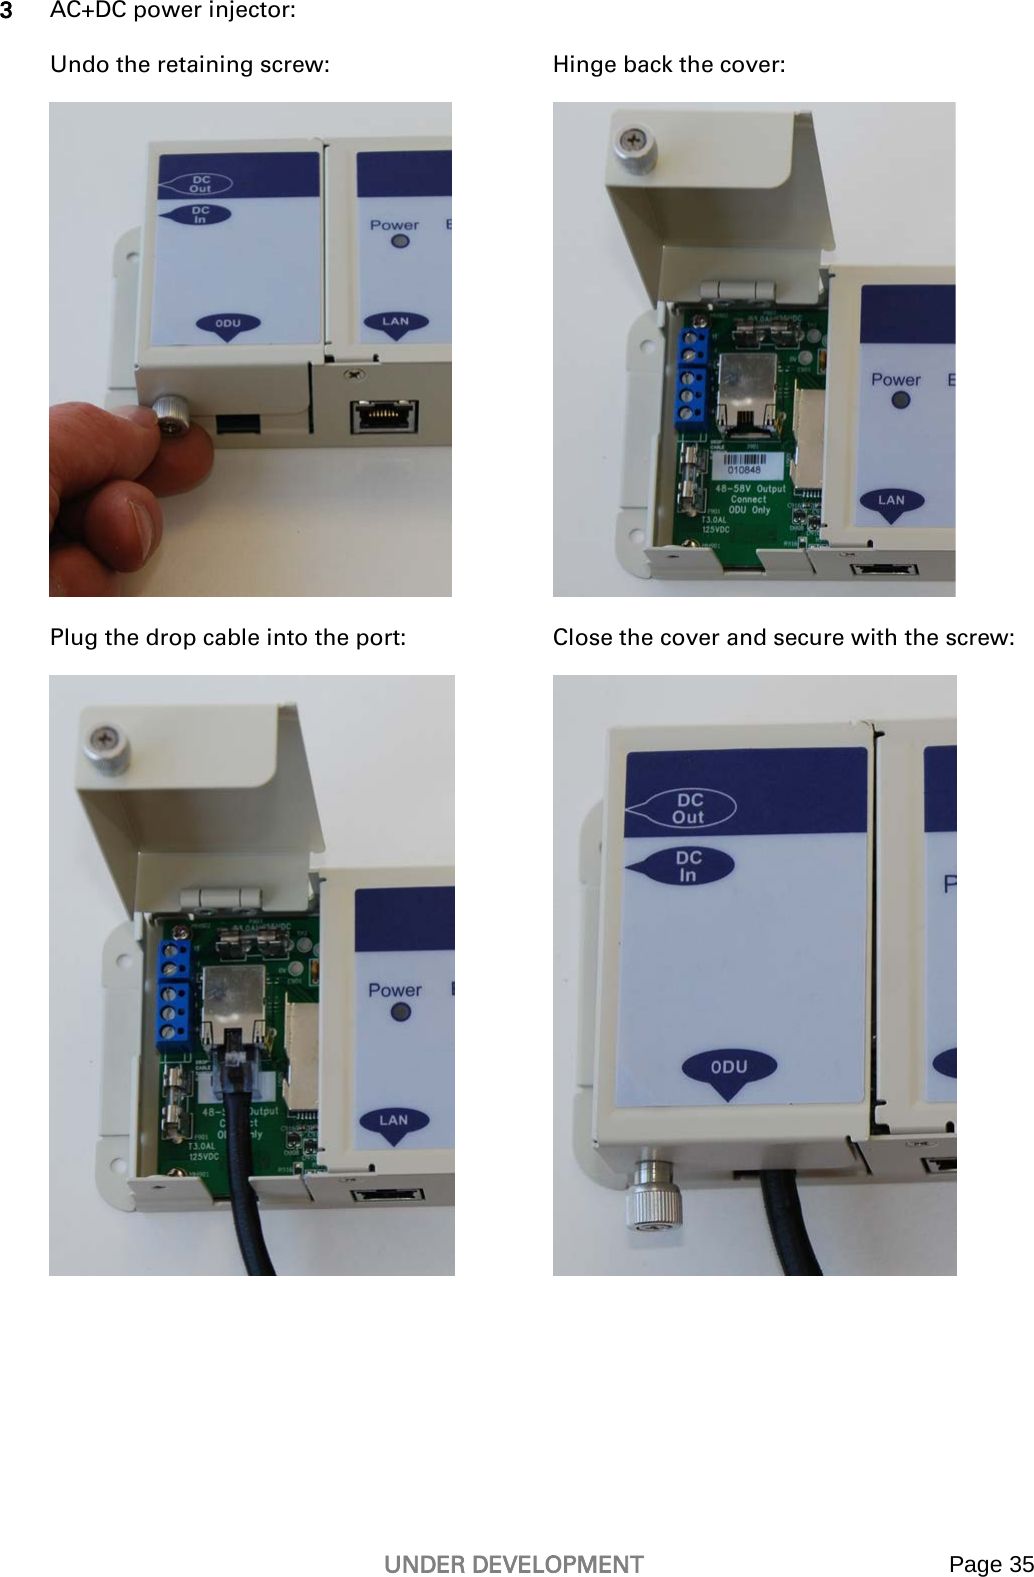   UNDER DEVELOPMENT Page 35   3 AC+DC power injector:  Undo the retaining screw:  Hinge back the cover:   Plug the drop cable into the port:  Close the cover and secure with the screw:   